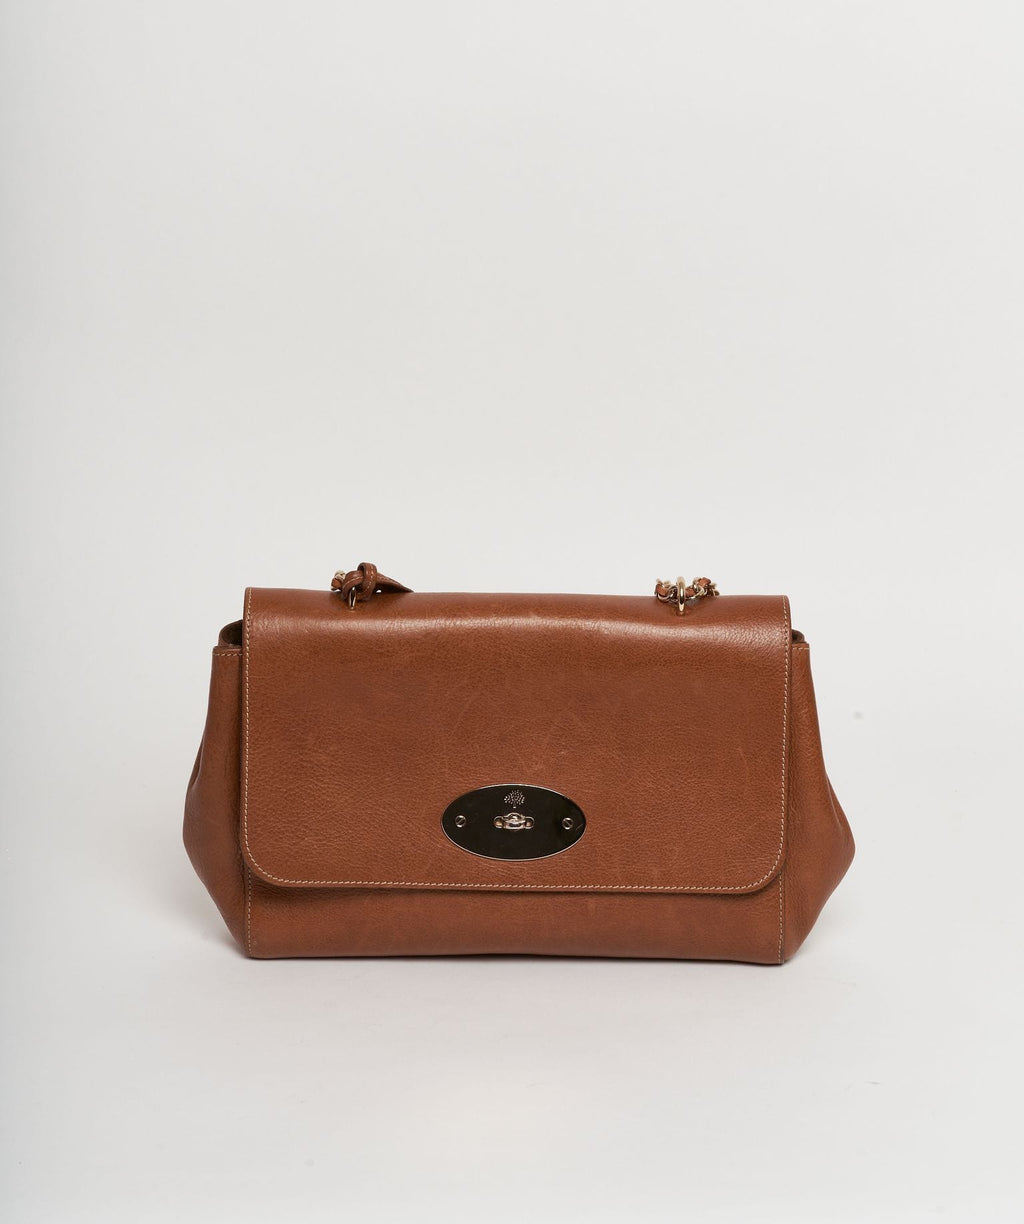 Mulberry Leather Messenger Bag - Brown Messenger Bags, Bags - MUL37914 |  The RealReal